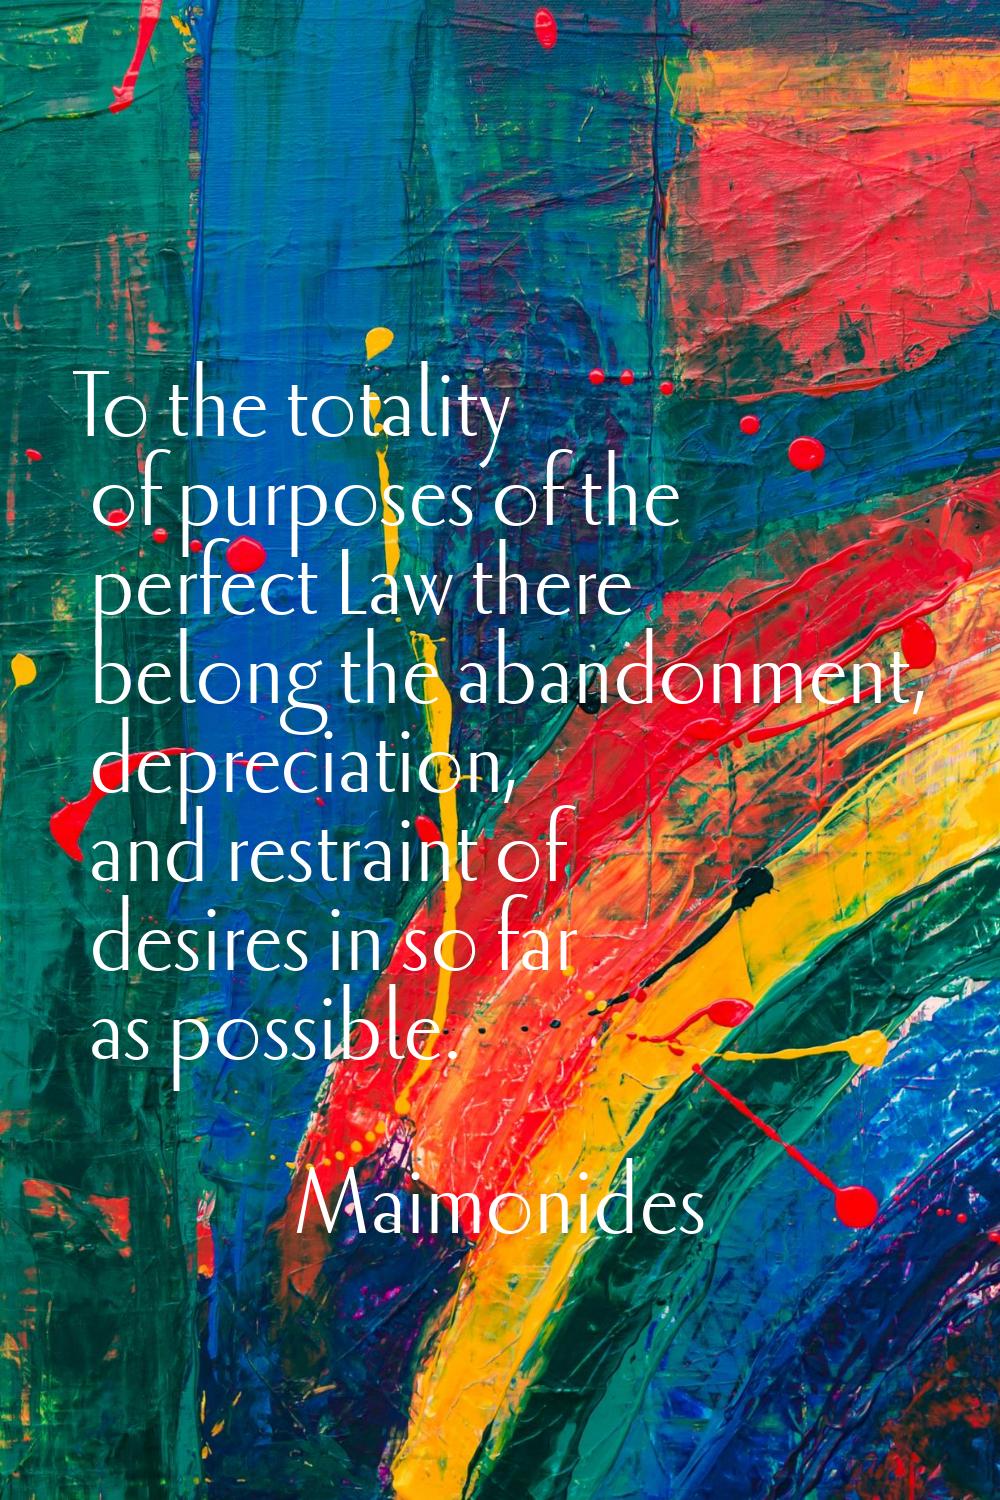 To the totality of purposes of the perfect Law there belong the abandonment, depreciation, and rest